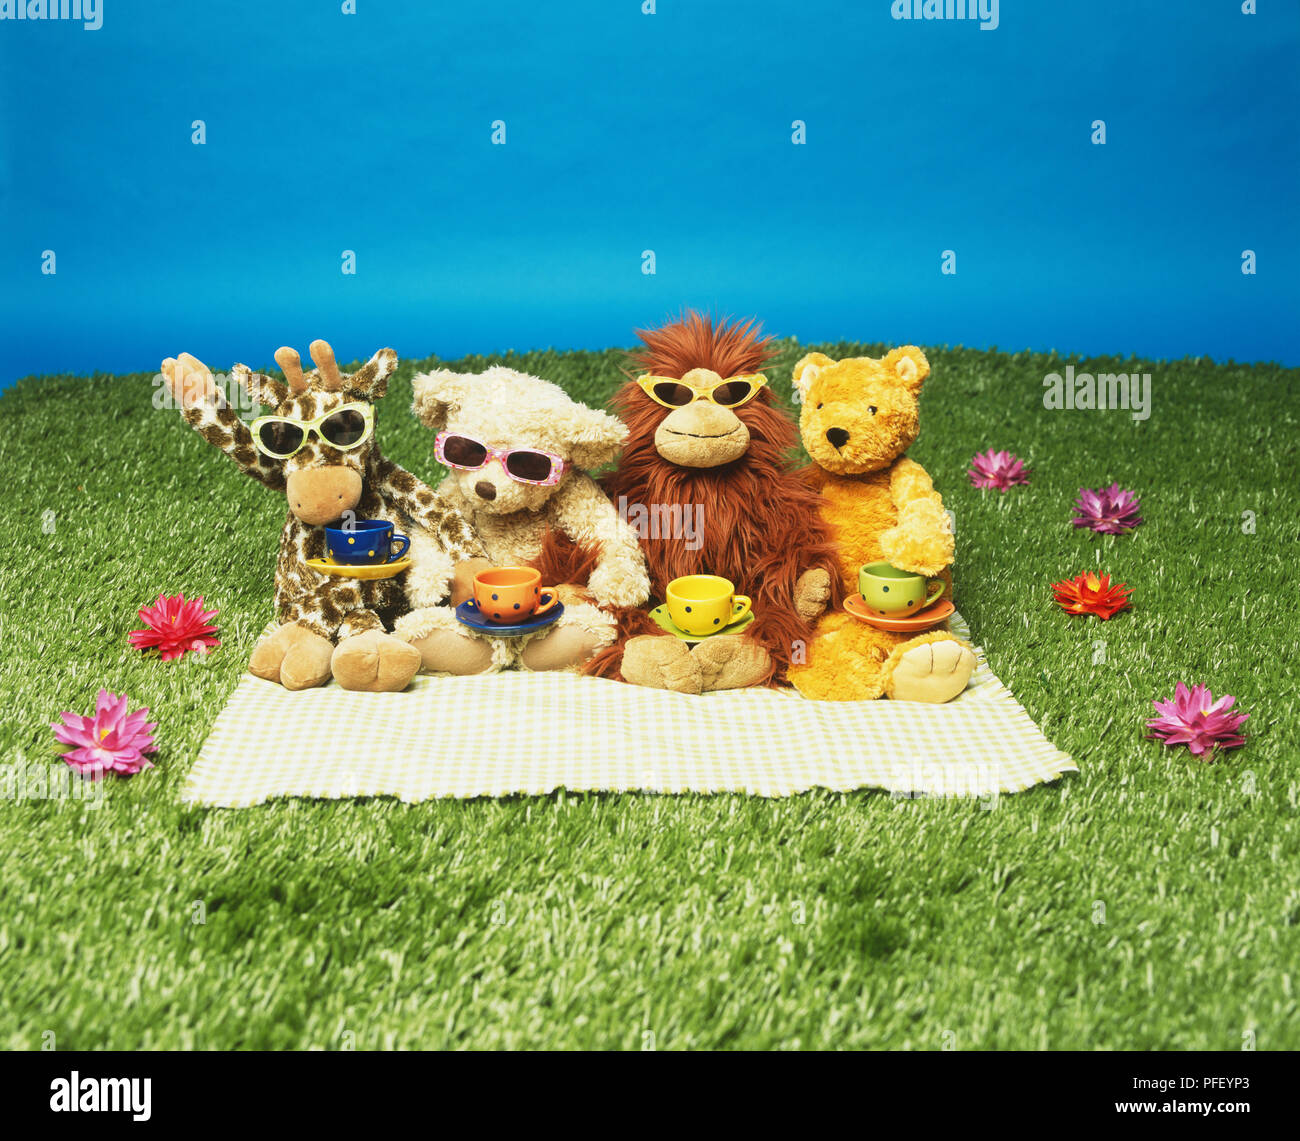 Toy giraffe, two bears and lion with sunglasses on, tea cups on their laps, sitting on a blanket in the grass Stock Photo